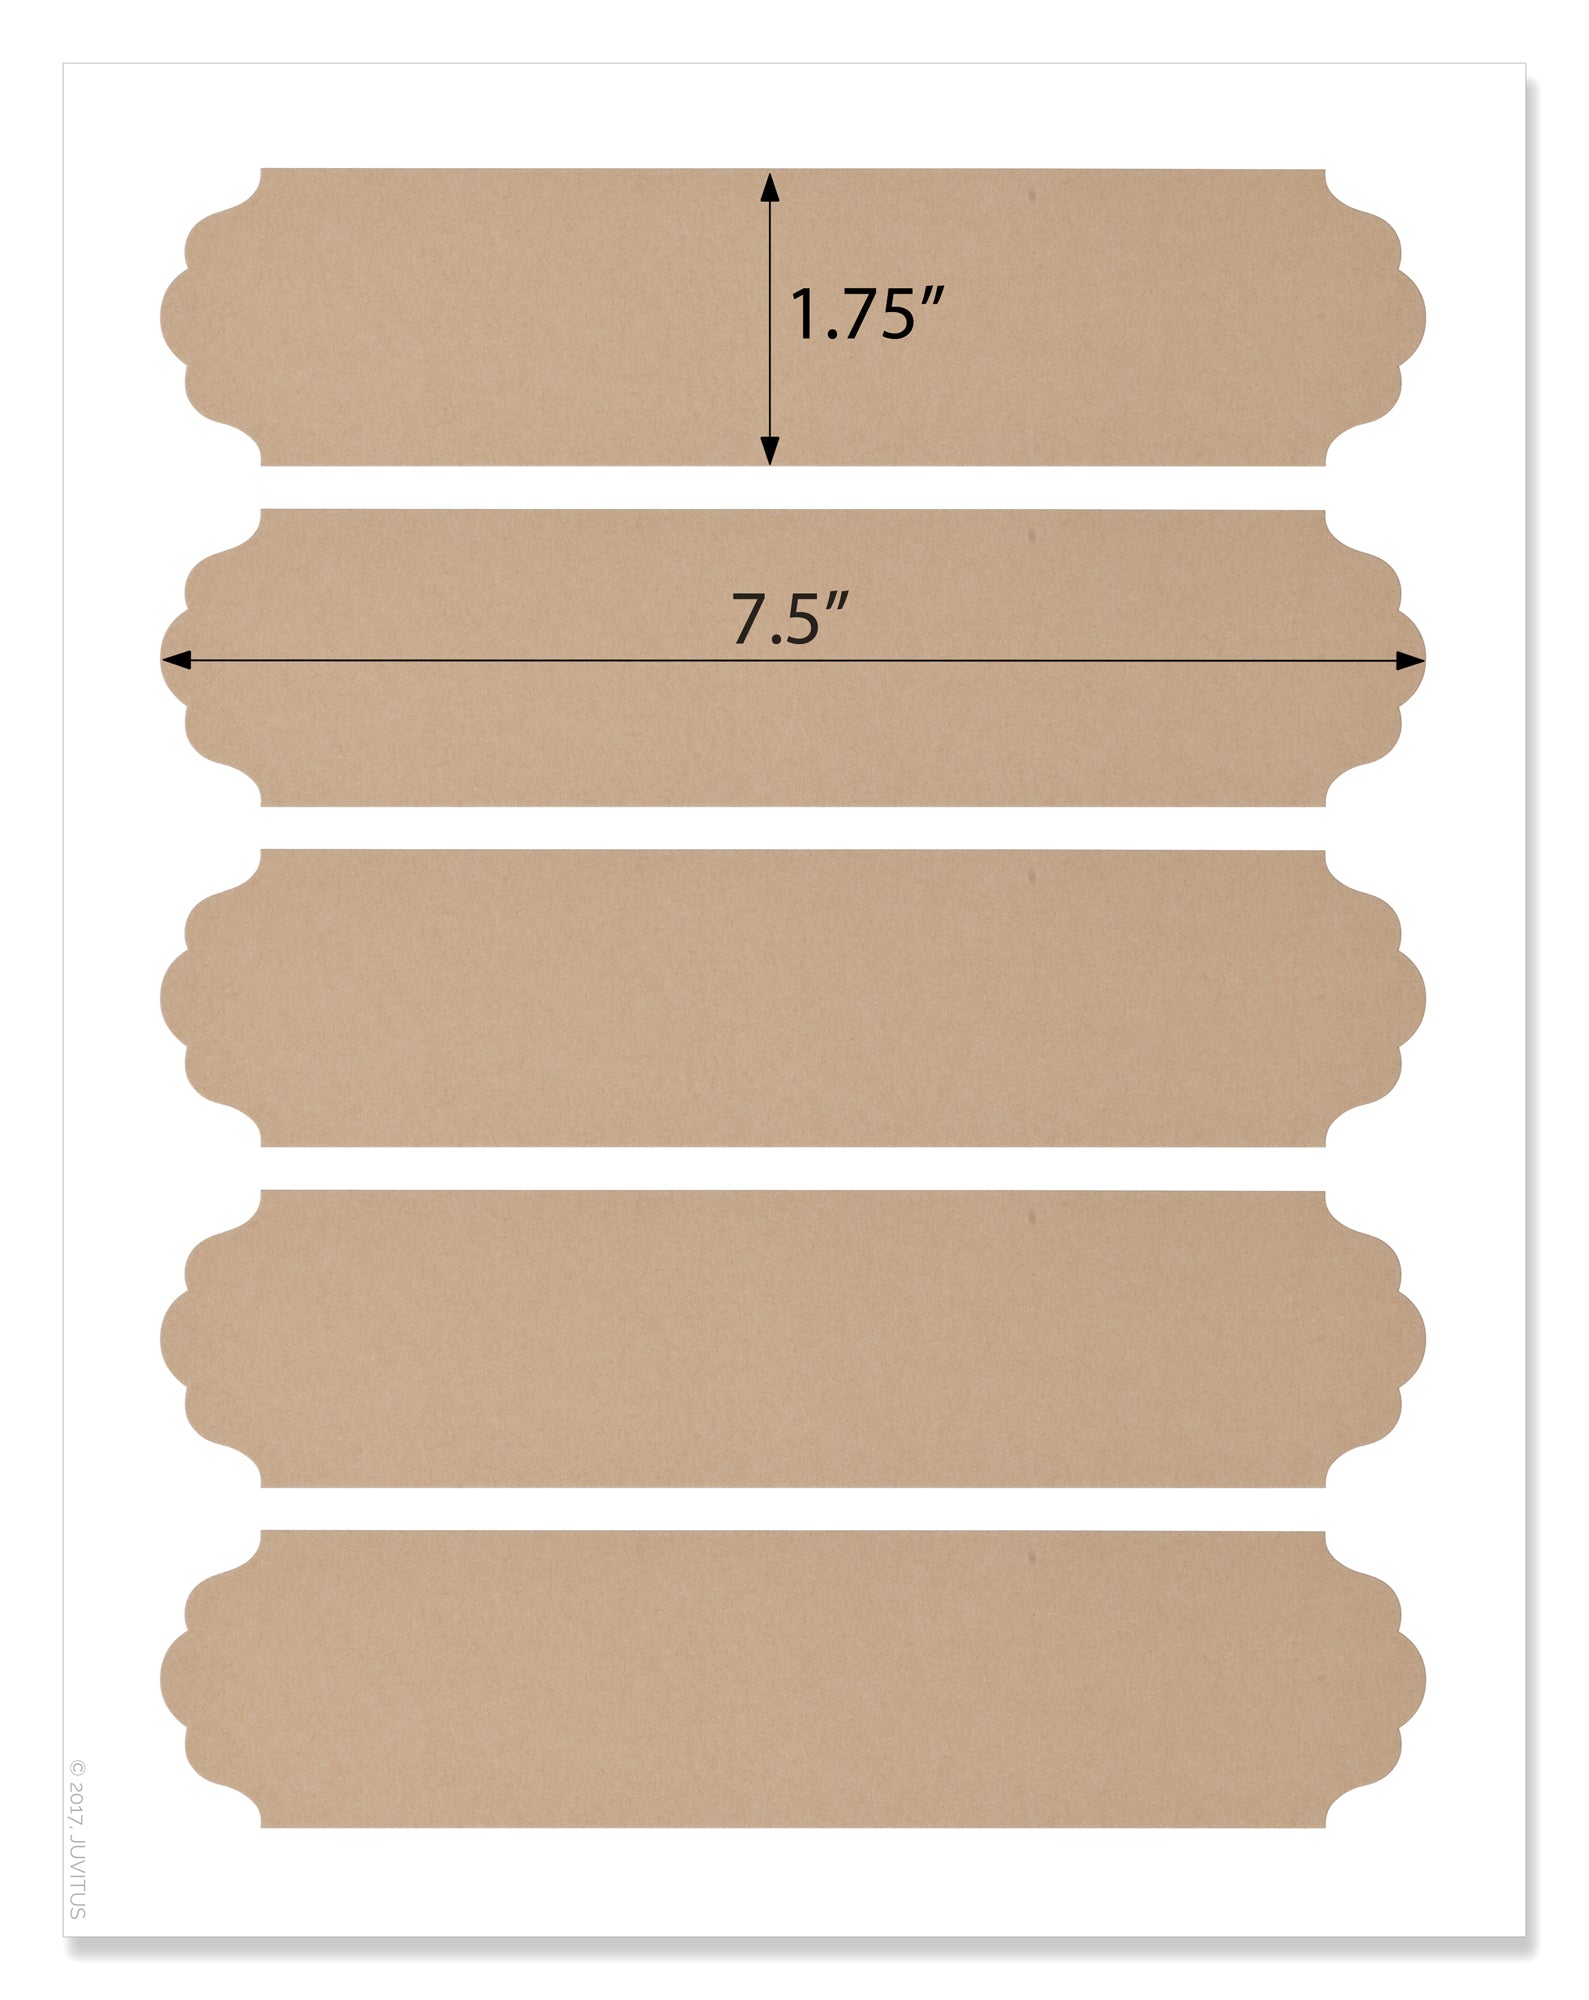 textured-brown-kraft-decorative-wrap-around-labels-7-5-x-1-75-inches-for-inkjet-and-laser